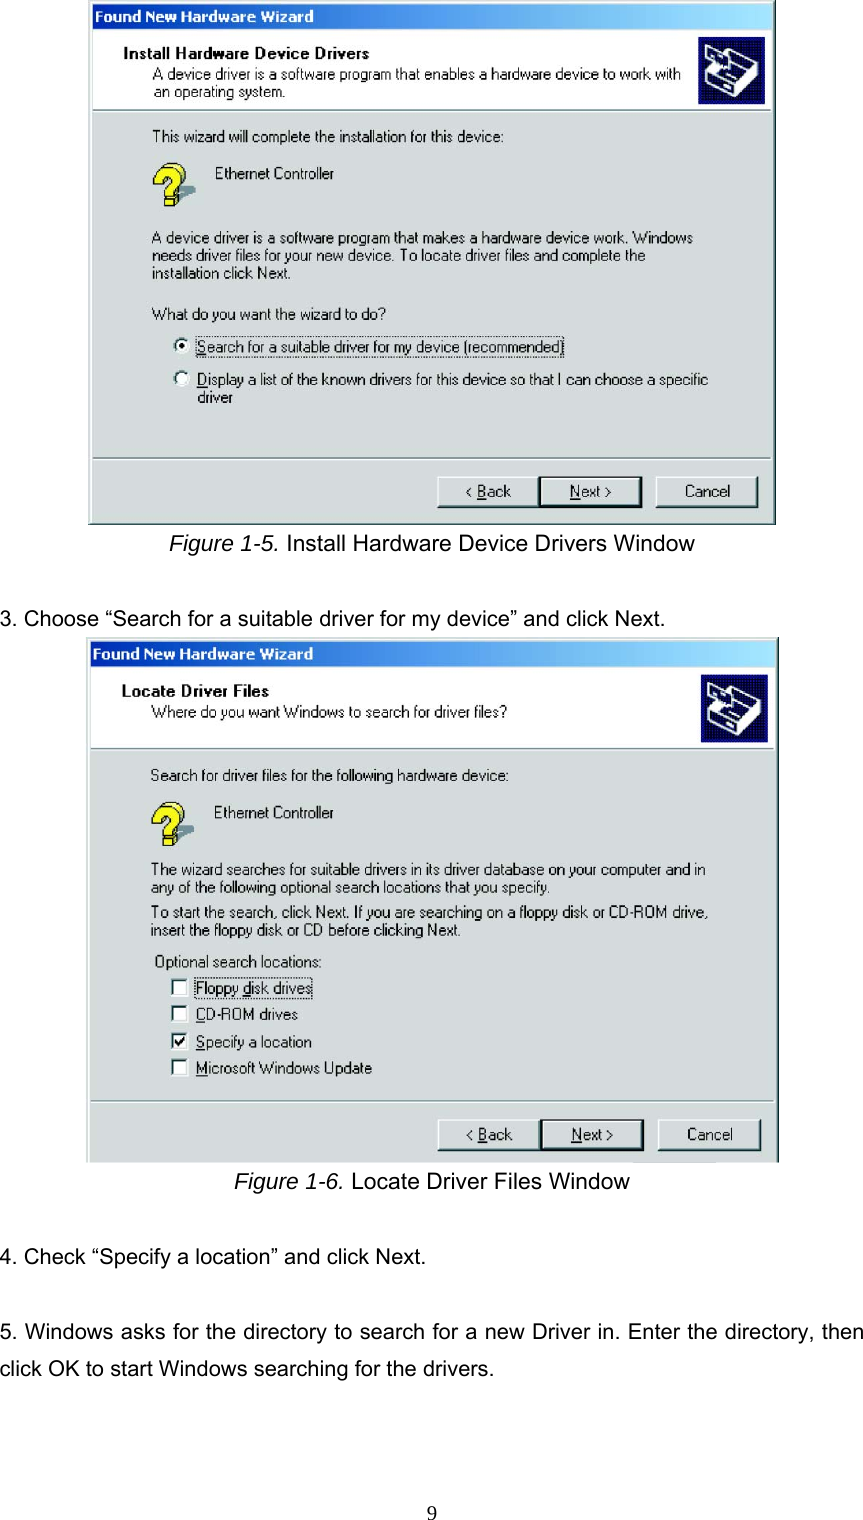  Figure 1-5. Install Hardware Device Drivers Window  3. Choose “Search for a suitable driver for my device” and click Next.  Figure 1-6. Locate Driver Files Window  4. Check “Specify a location” and click Next.  5. Windows asks for the directory to search for a new Driver in. Enter the directory, then click OK to start Windows searching for the drivers.  9